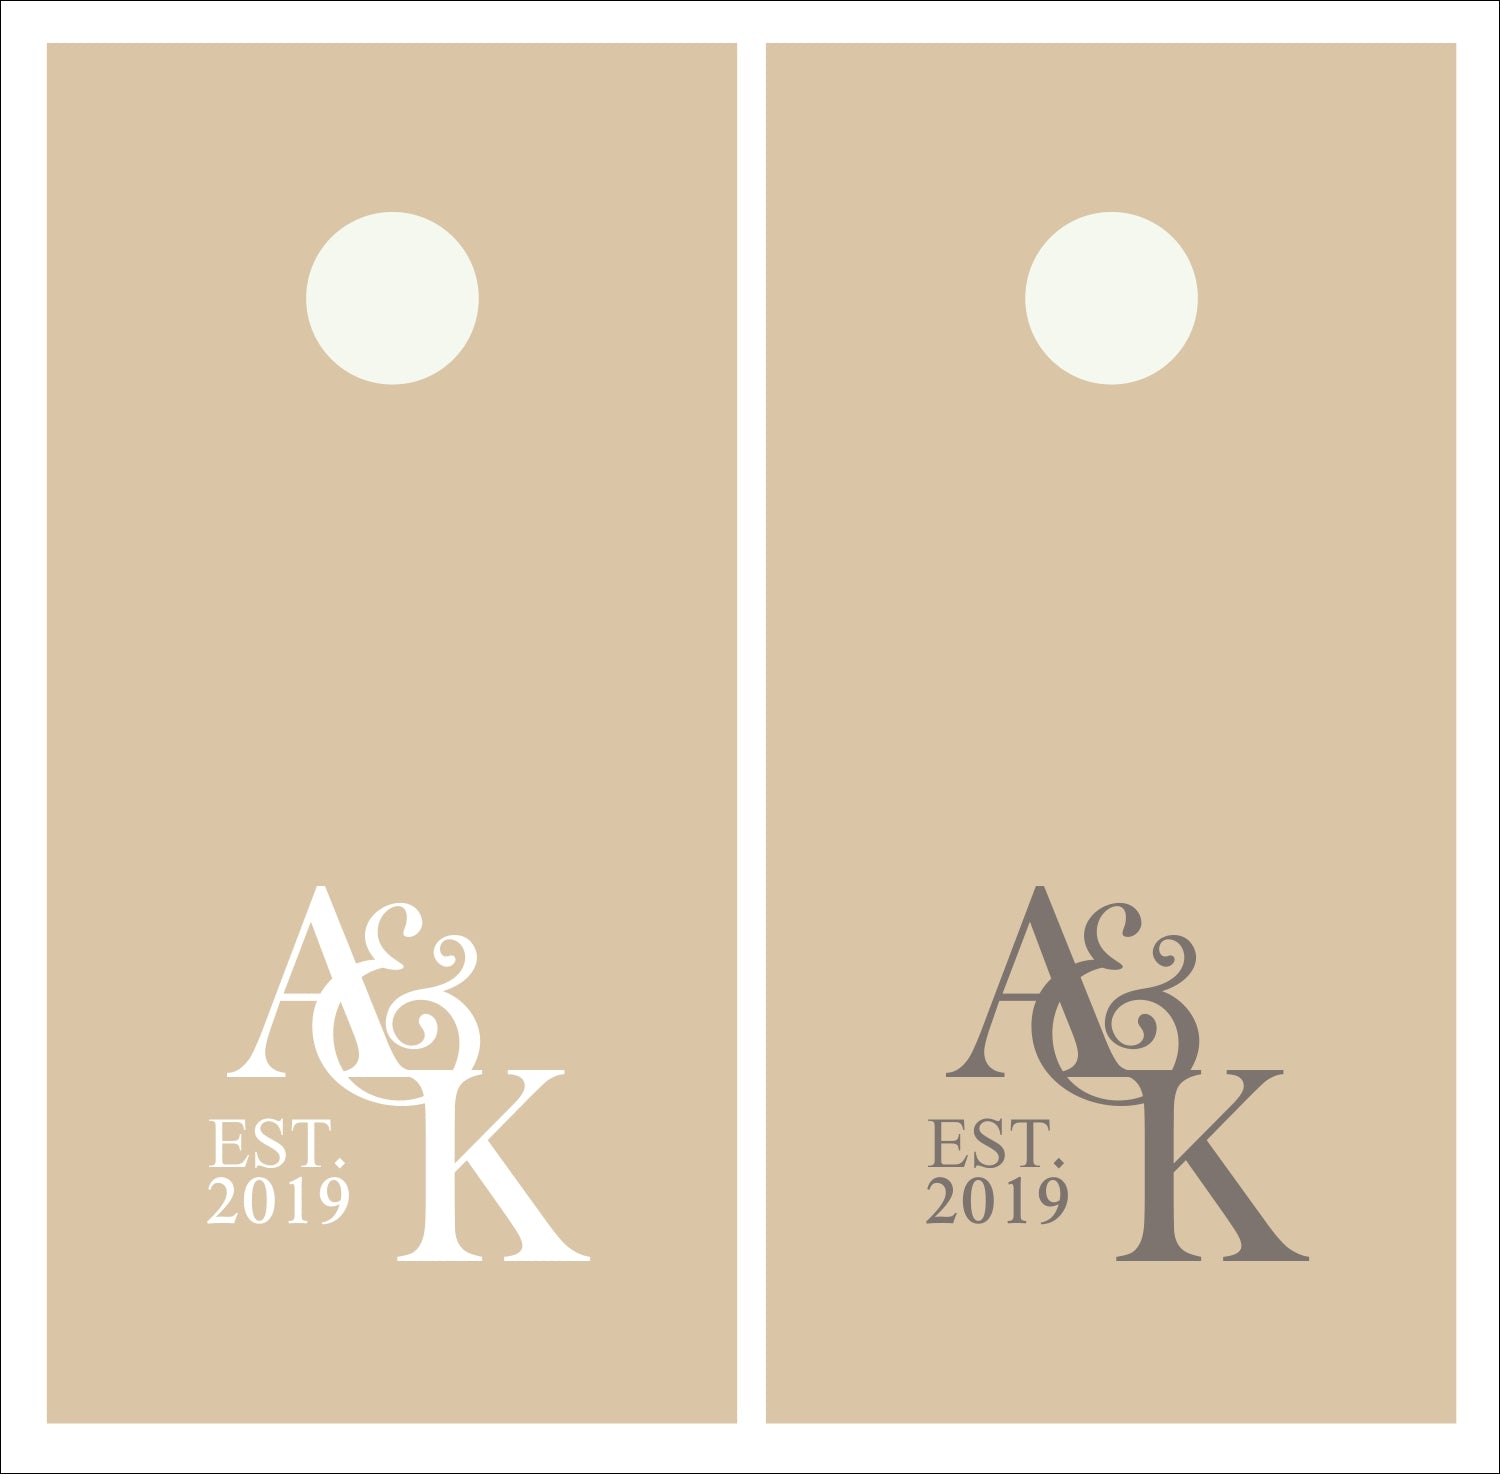 Bride & Groom Intertwined Wedding Initials Vinyl Decals - Set of TWO for Cornhole Game